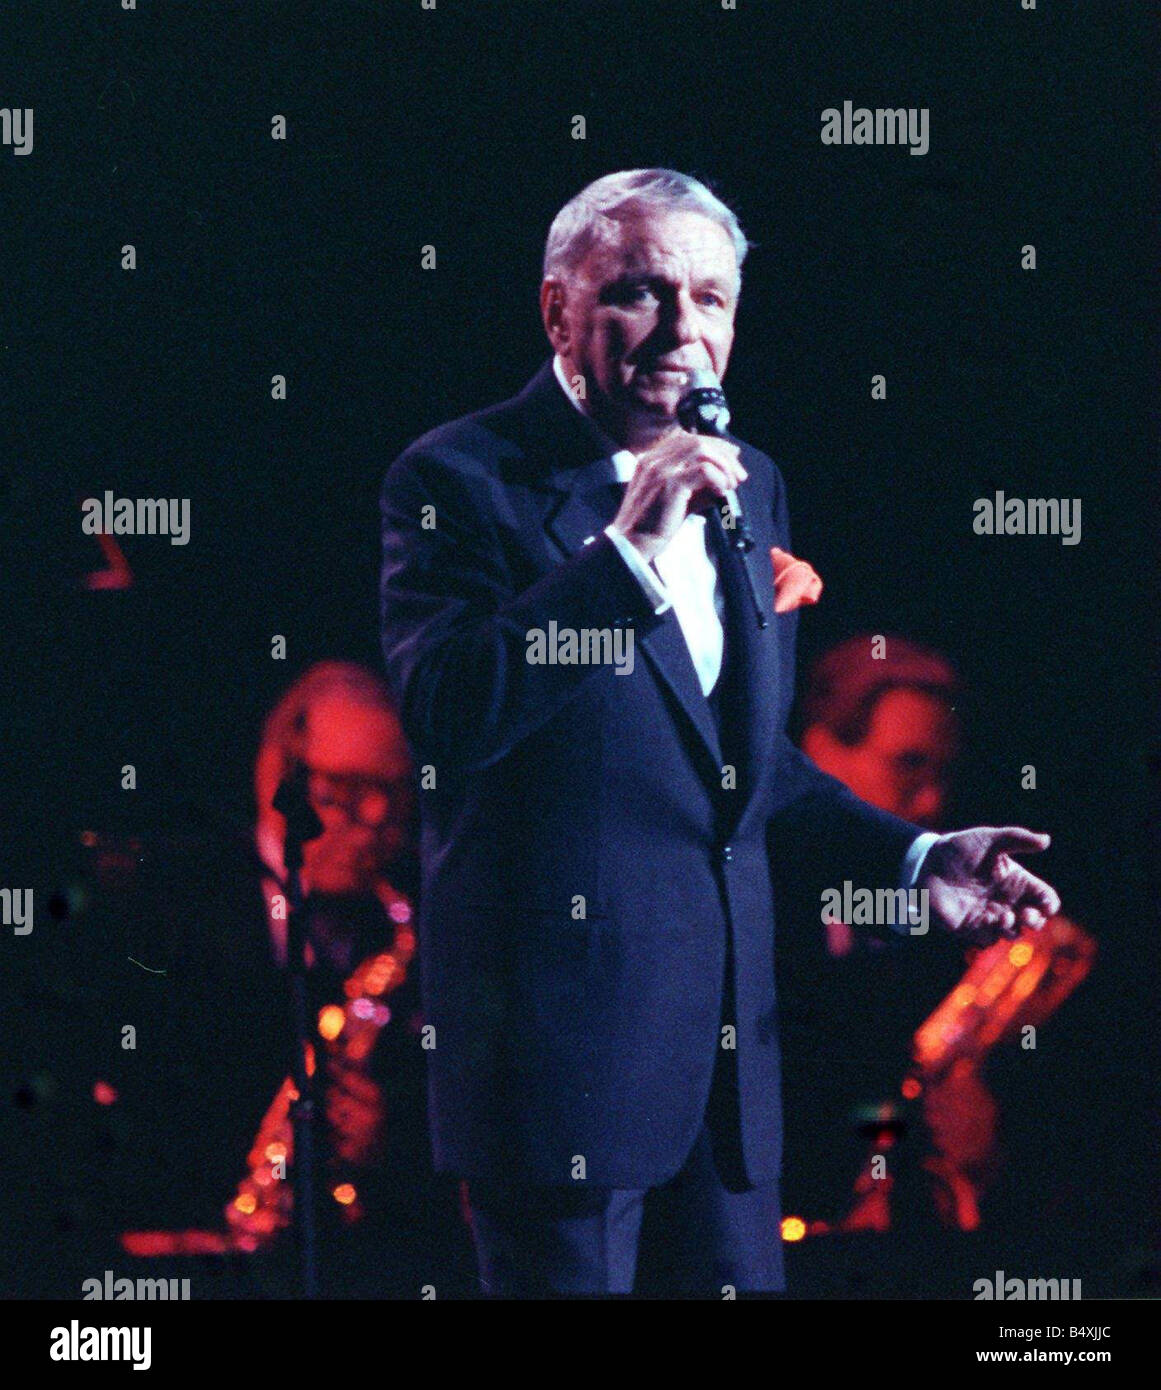 Frank Sinatra on stage in concert July 1990 Ibrox Glasgow Stock Photo